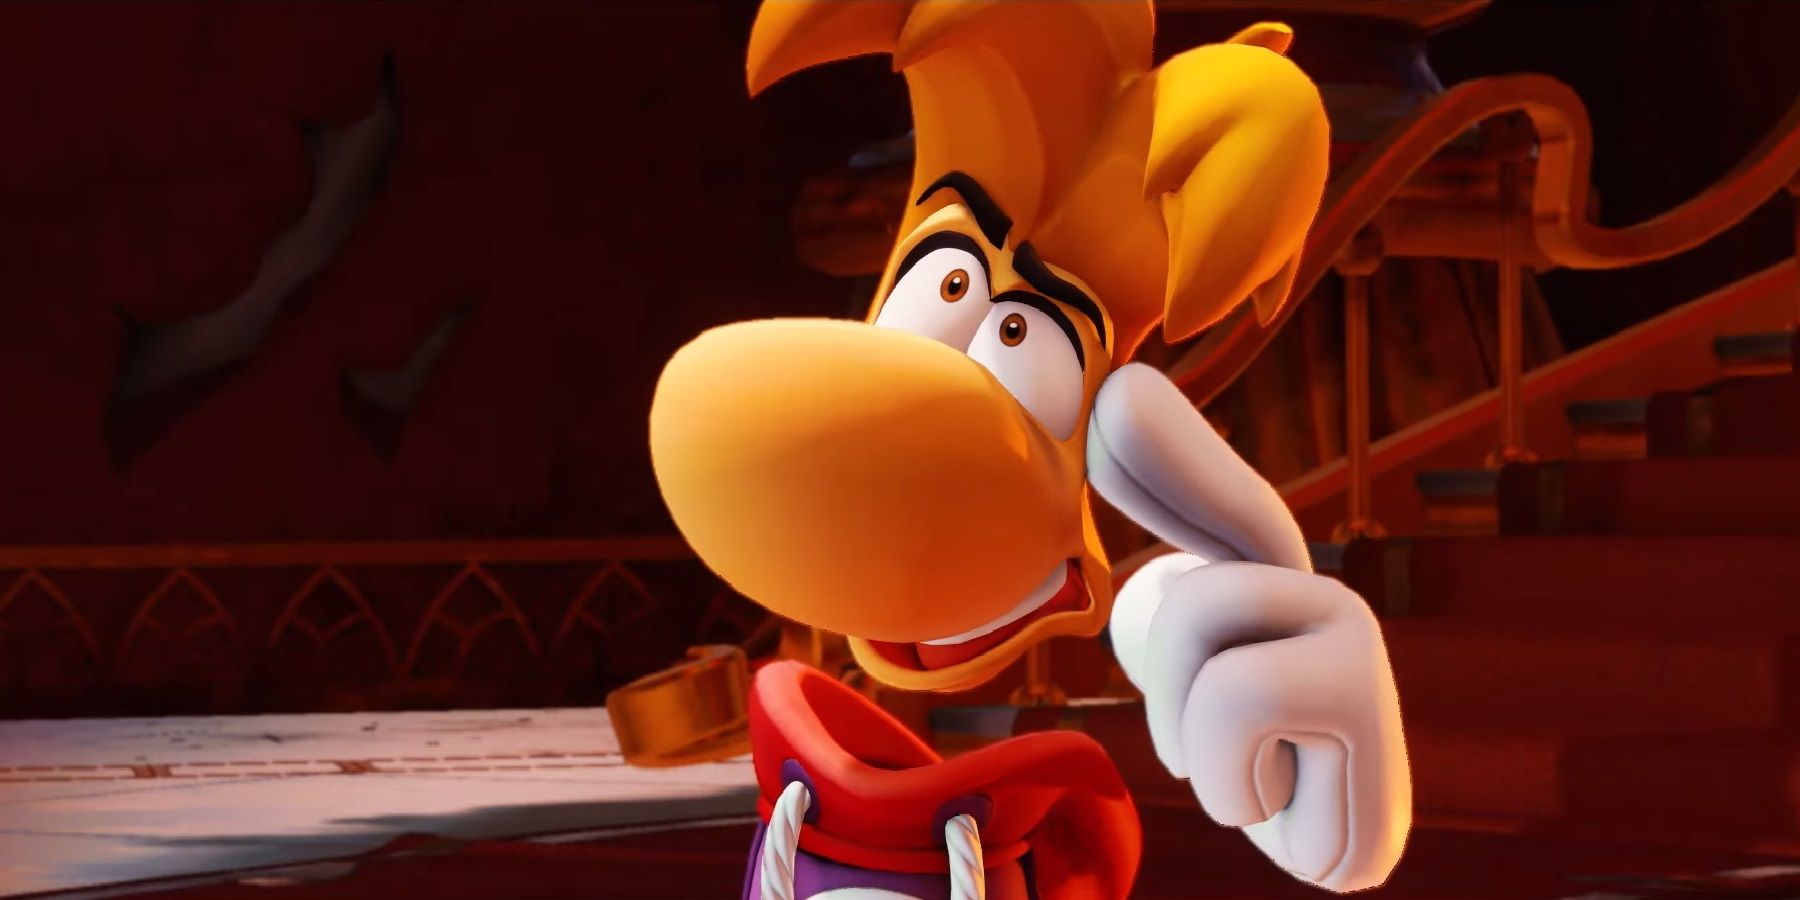 Rayman will join Mario + Rabbids: Sparks of Hope in upcoming free DLC